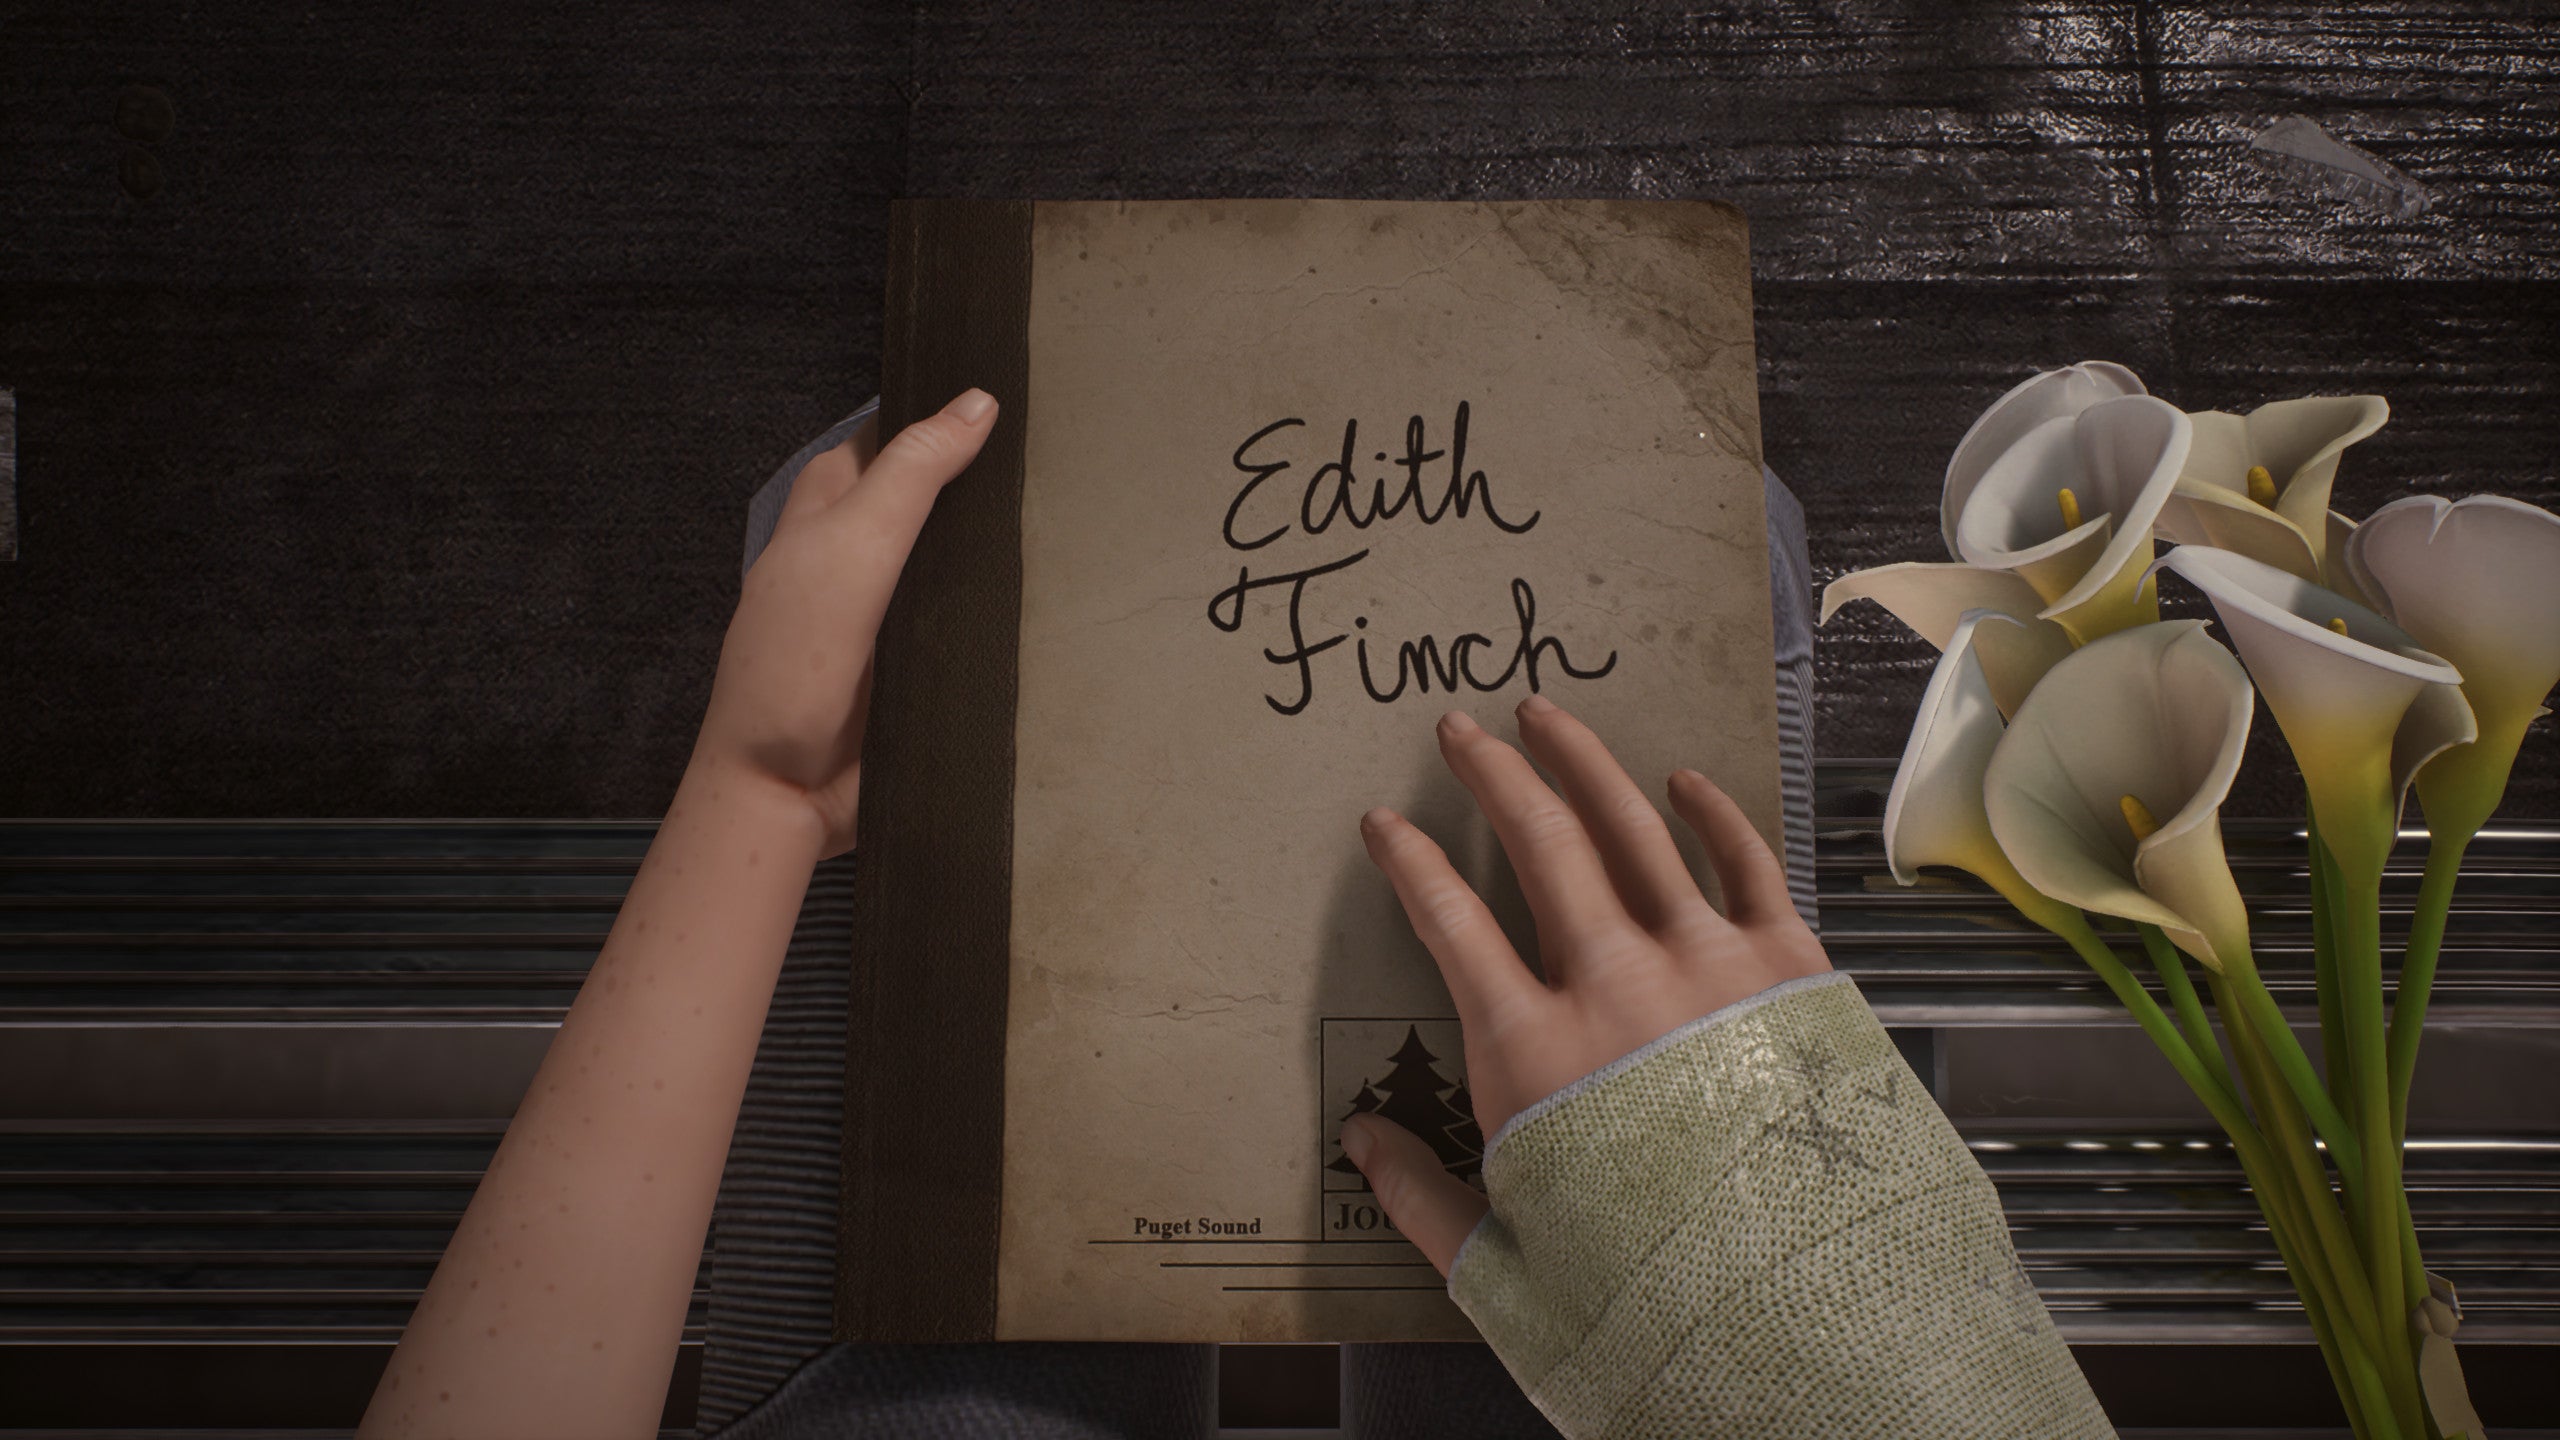 A hand touches Edith Finch's journal in a What Remains of Edith Finch screenshot.